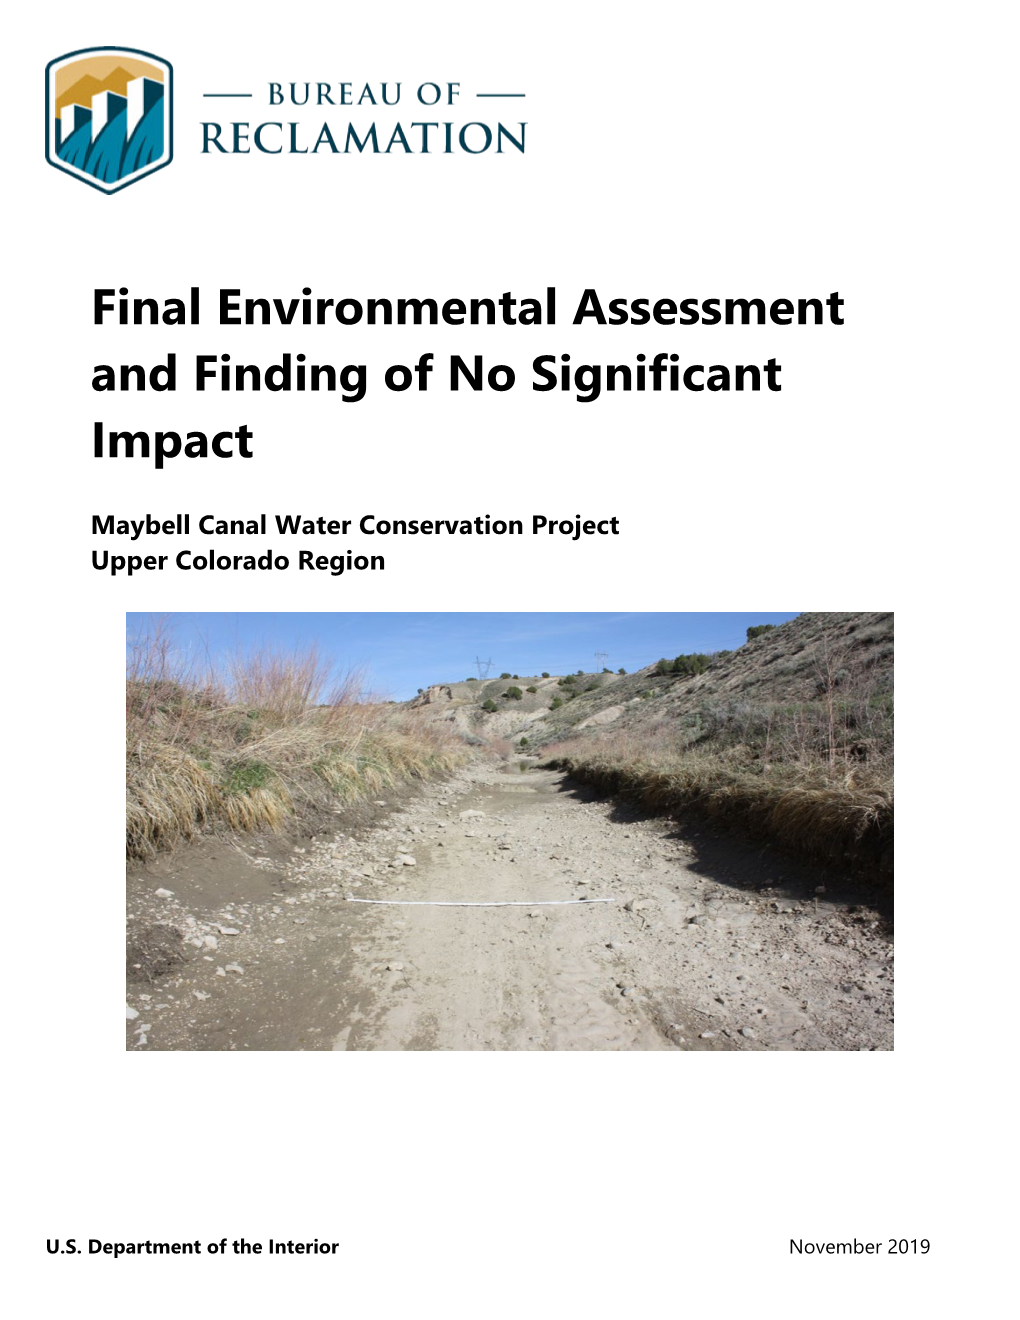 Final Environmental Assessment and Finding of No Significant Impact